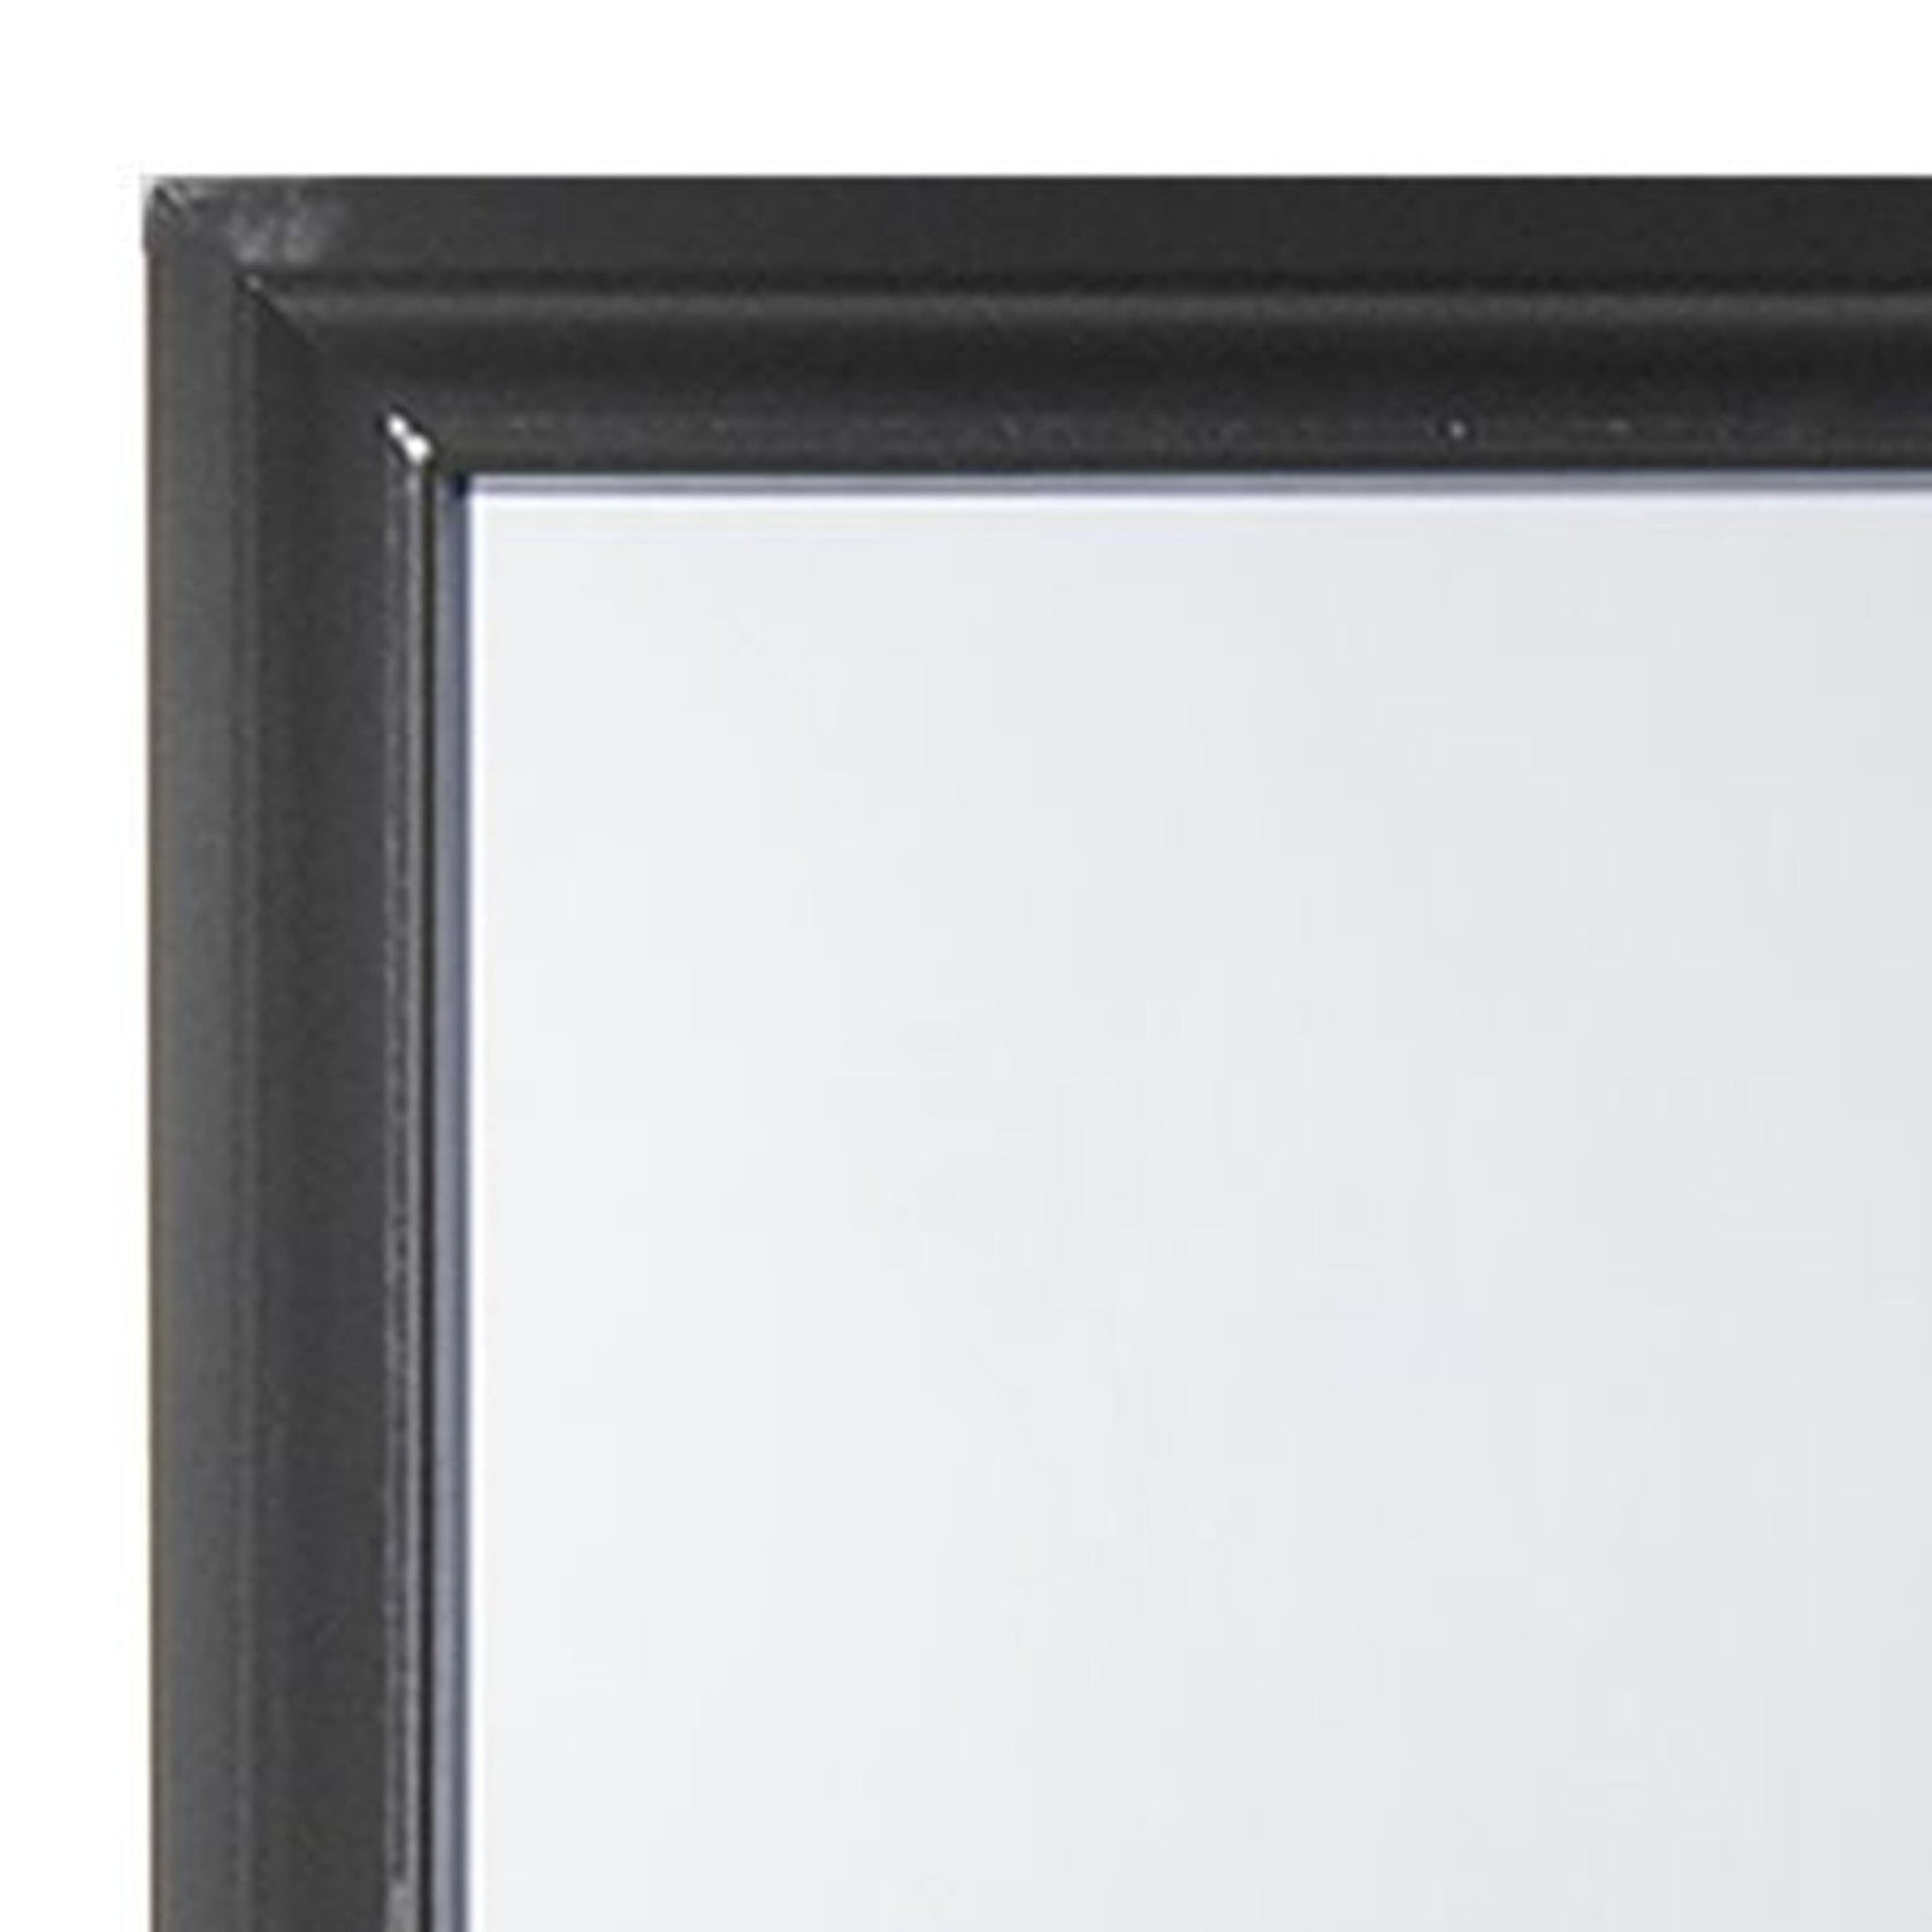 Benzara Black Contemporary Style Wooden Mirror With Raised Frame